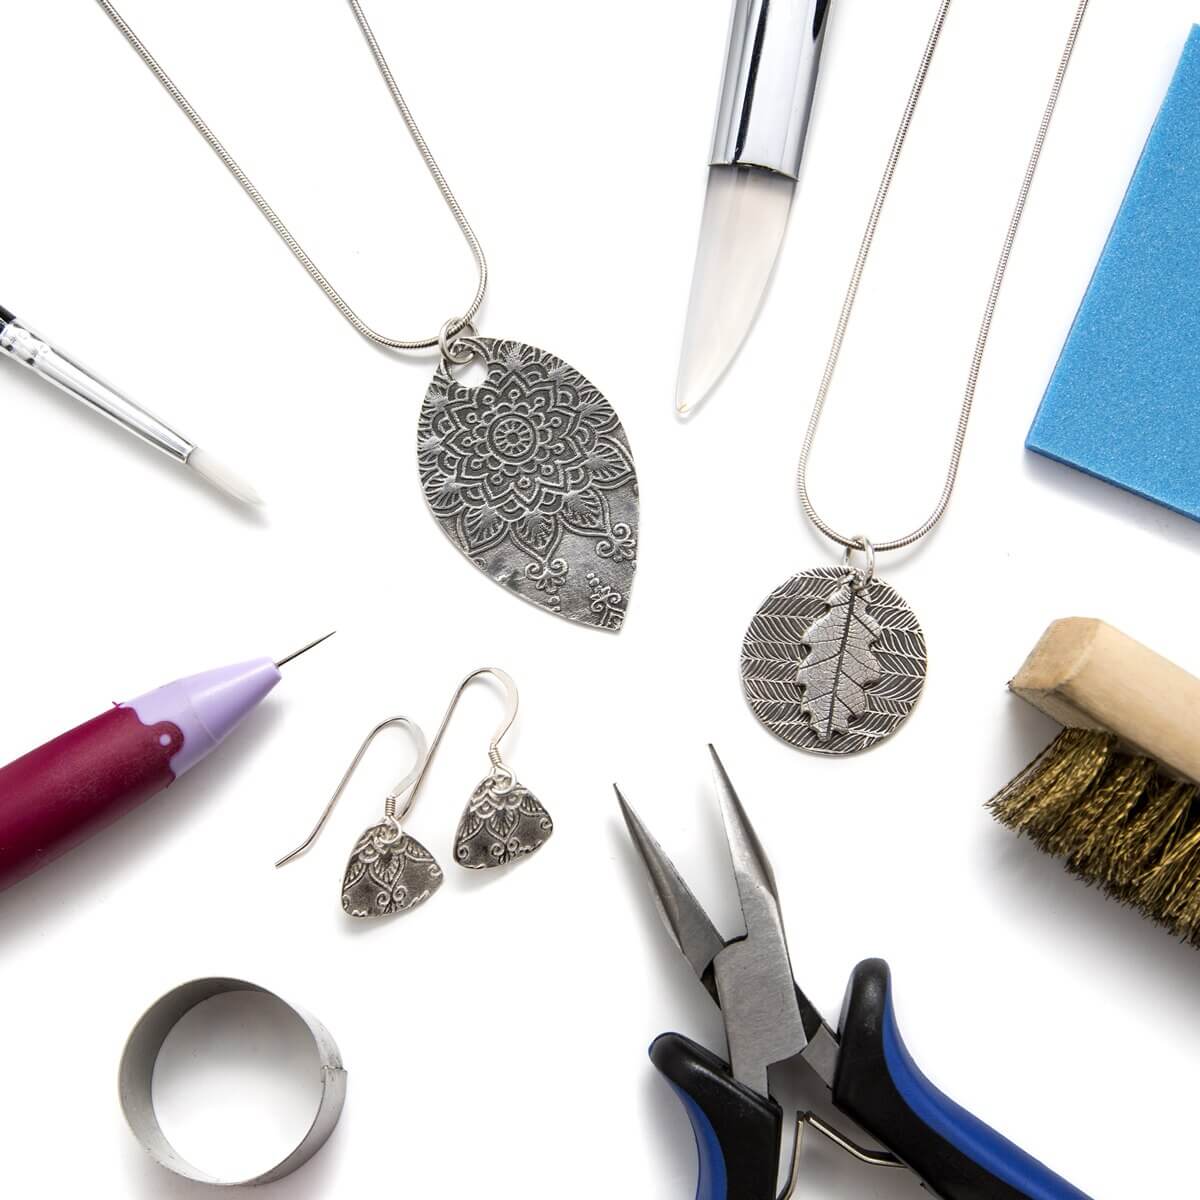 Top 10 Tools For Silver Clay Jewelry